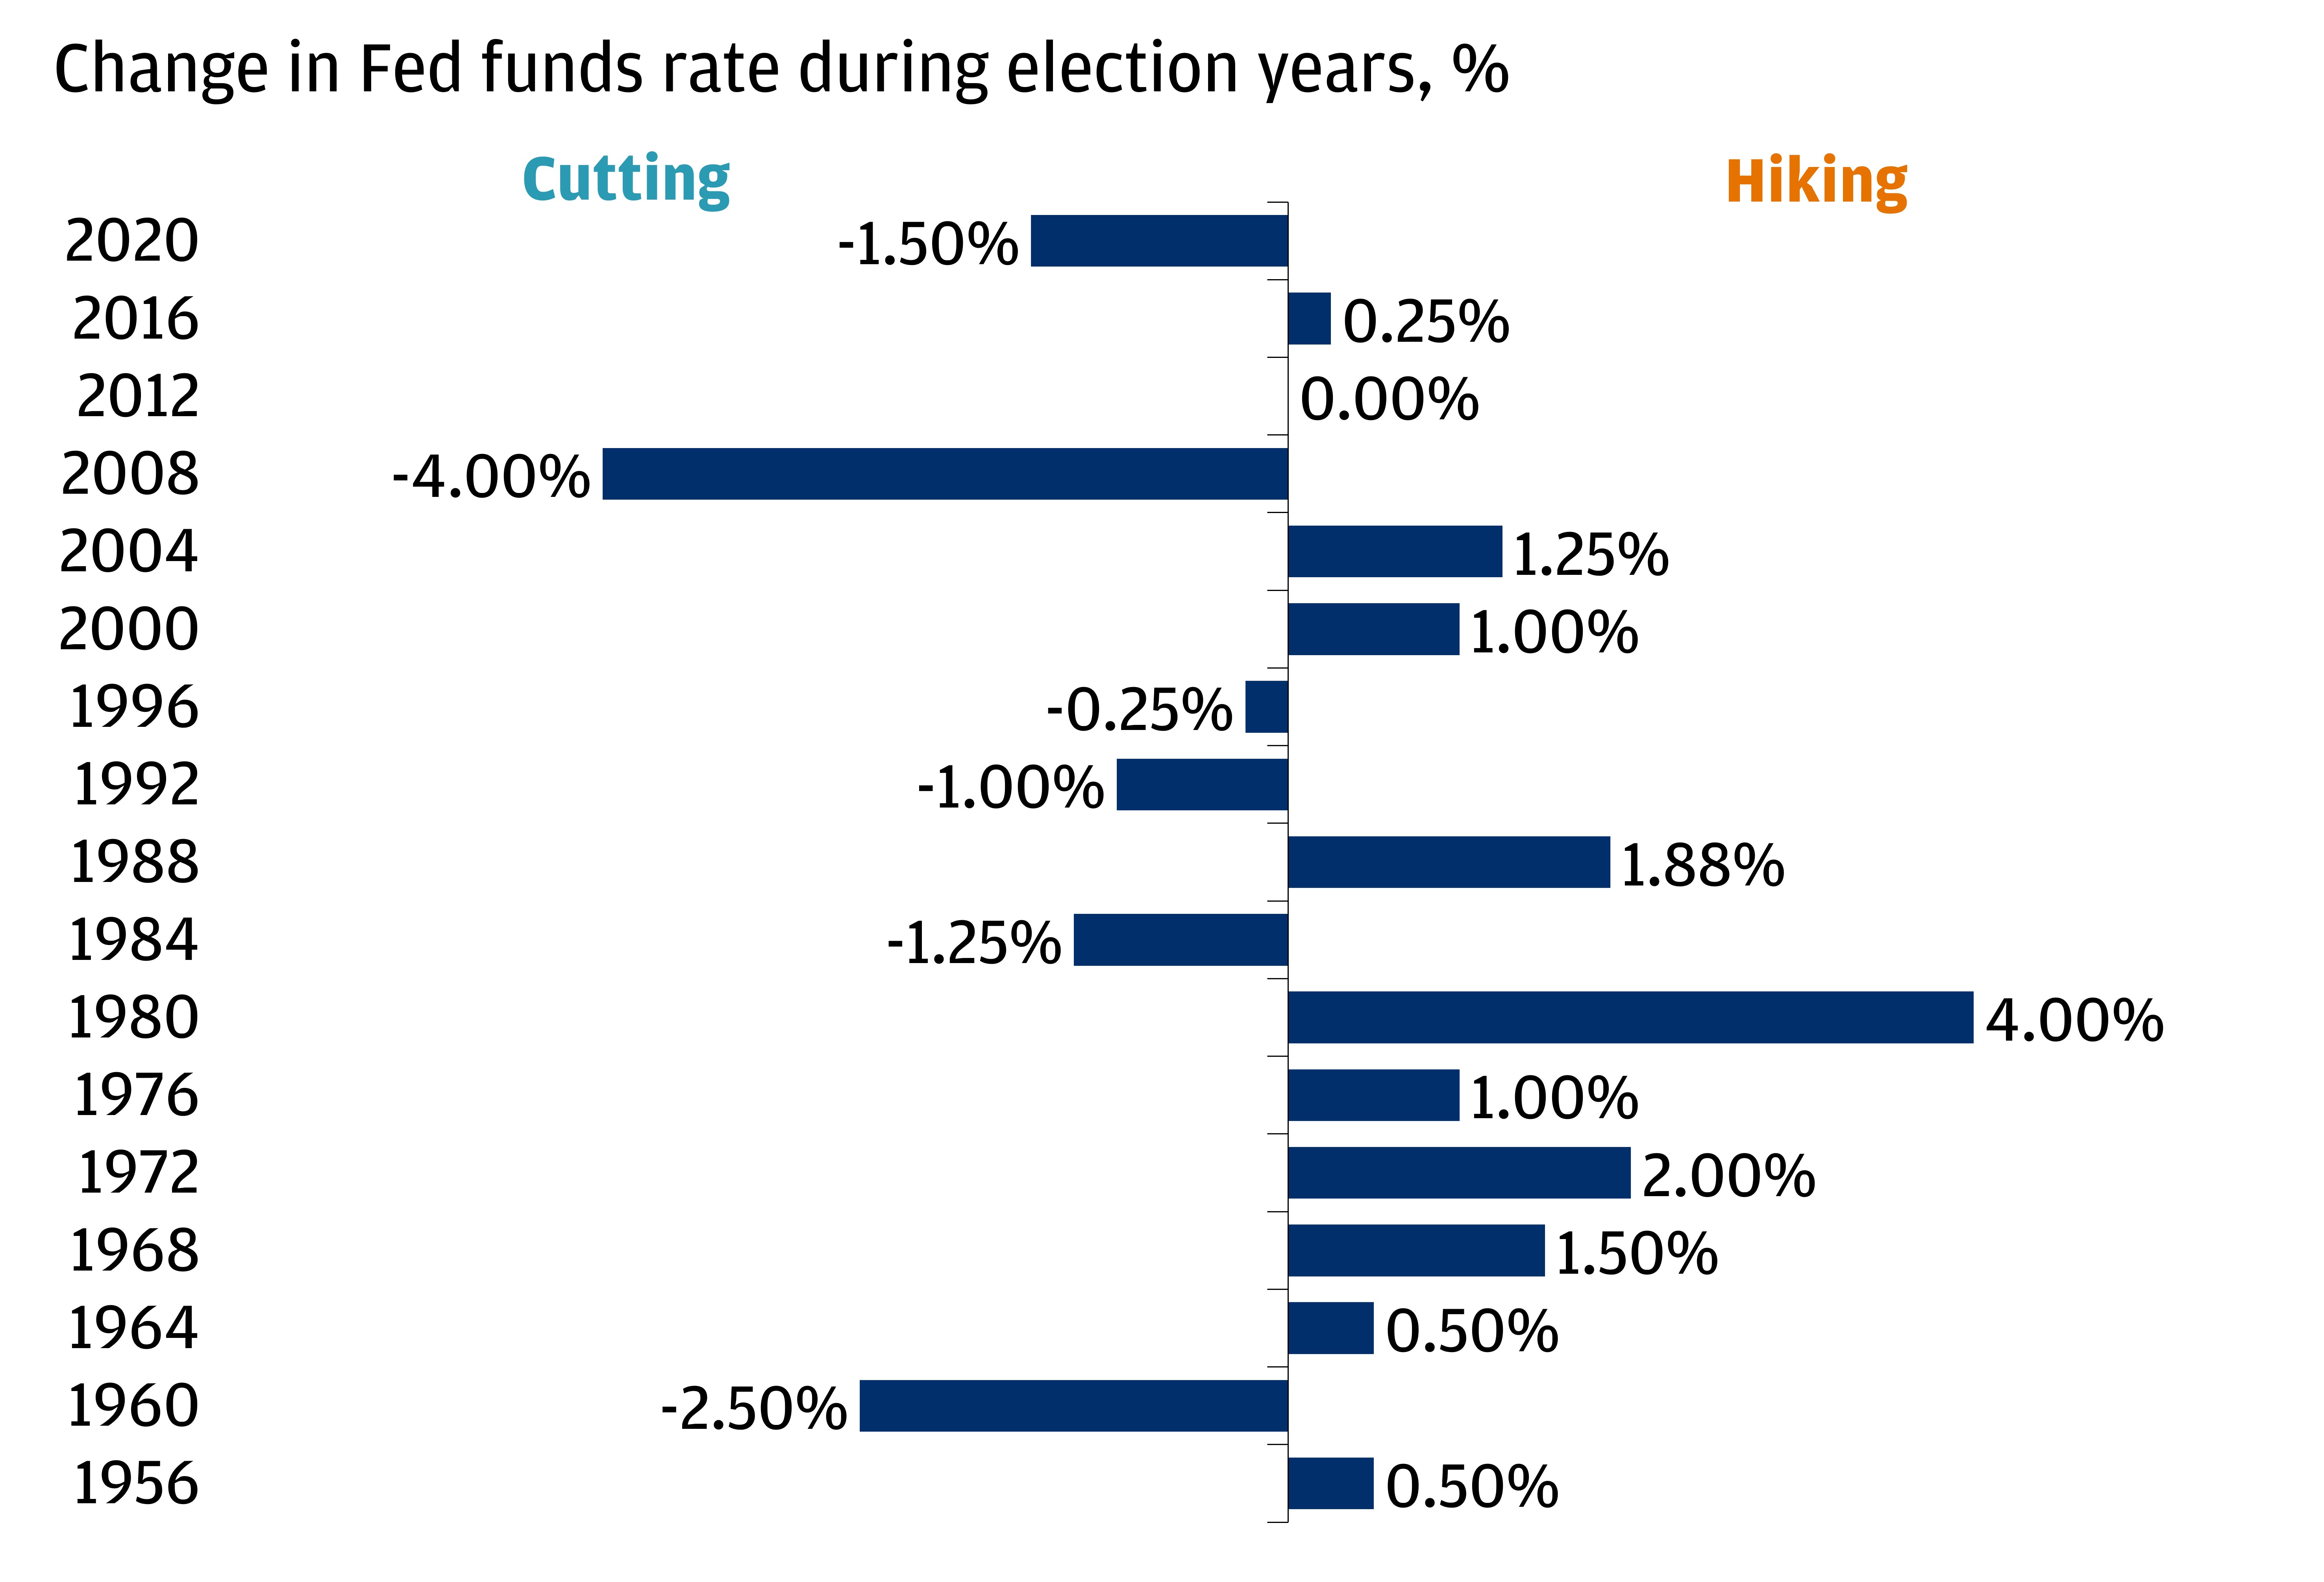 This chart shows the change in the fed funds rate during election years.